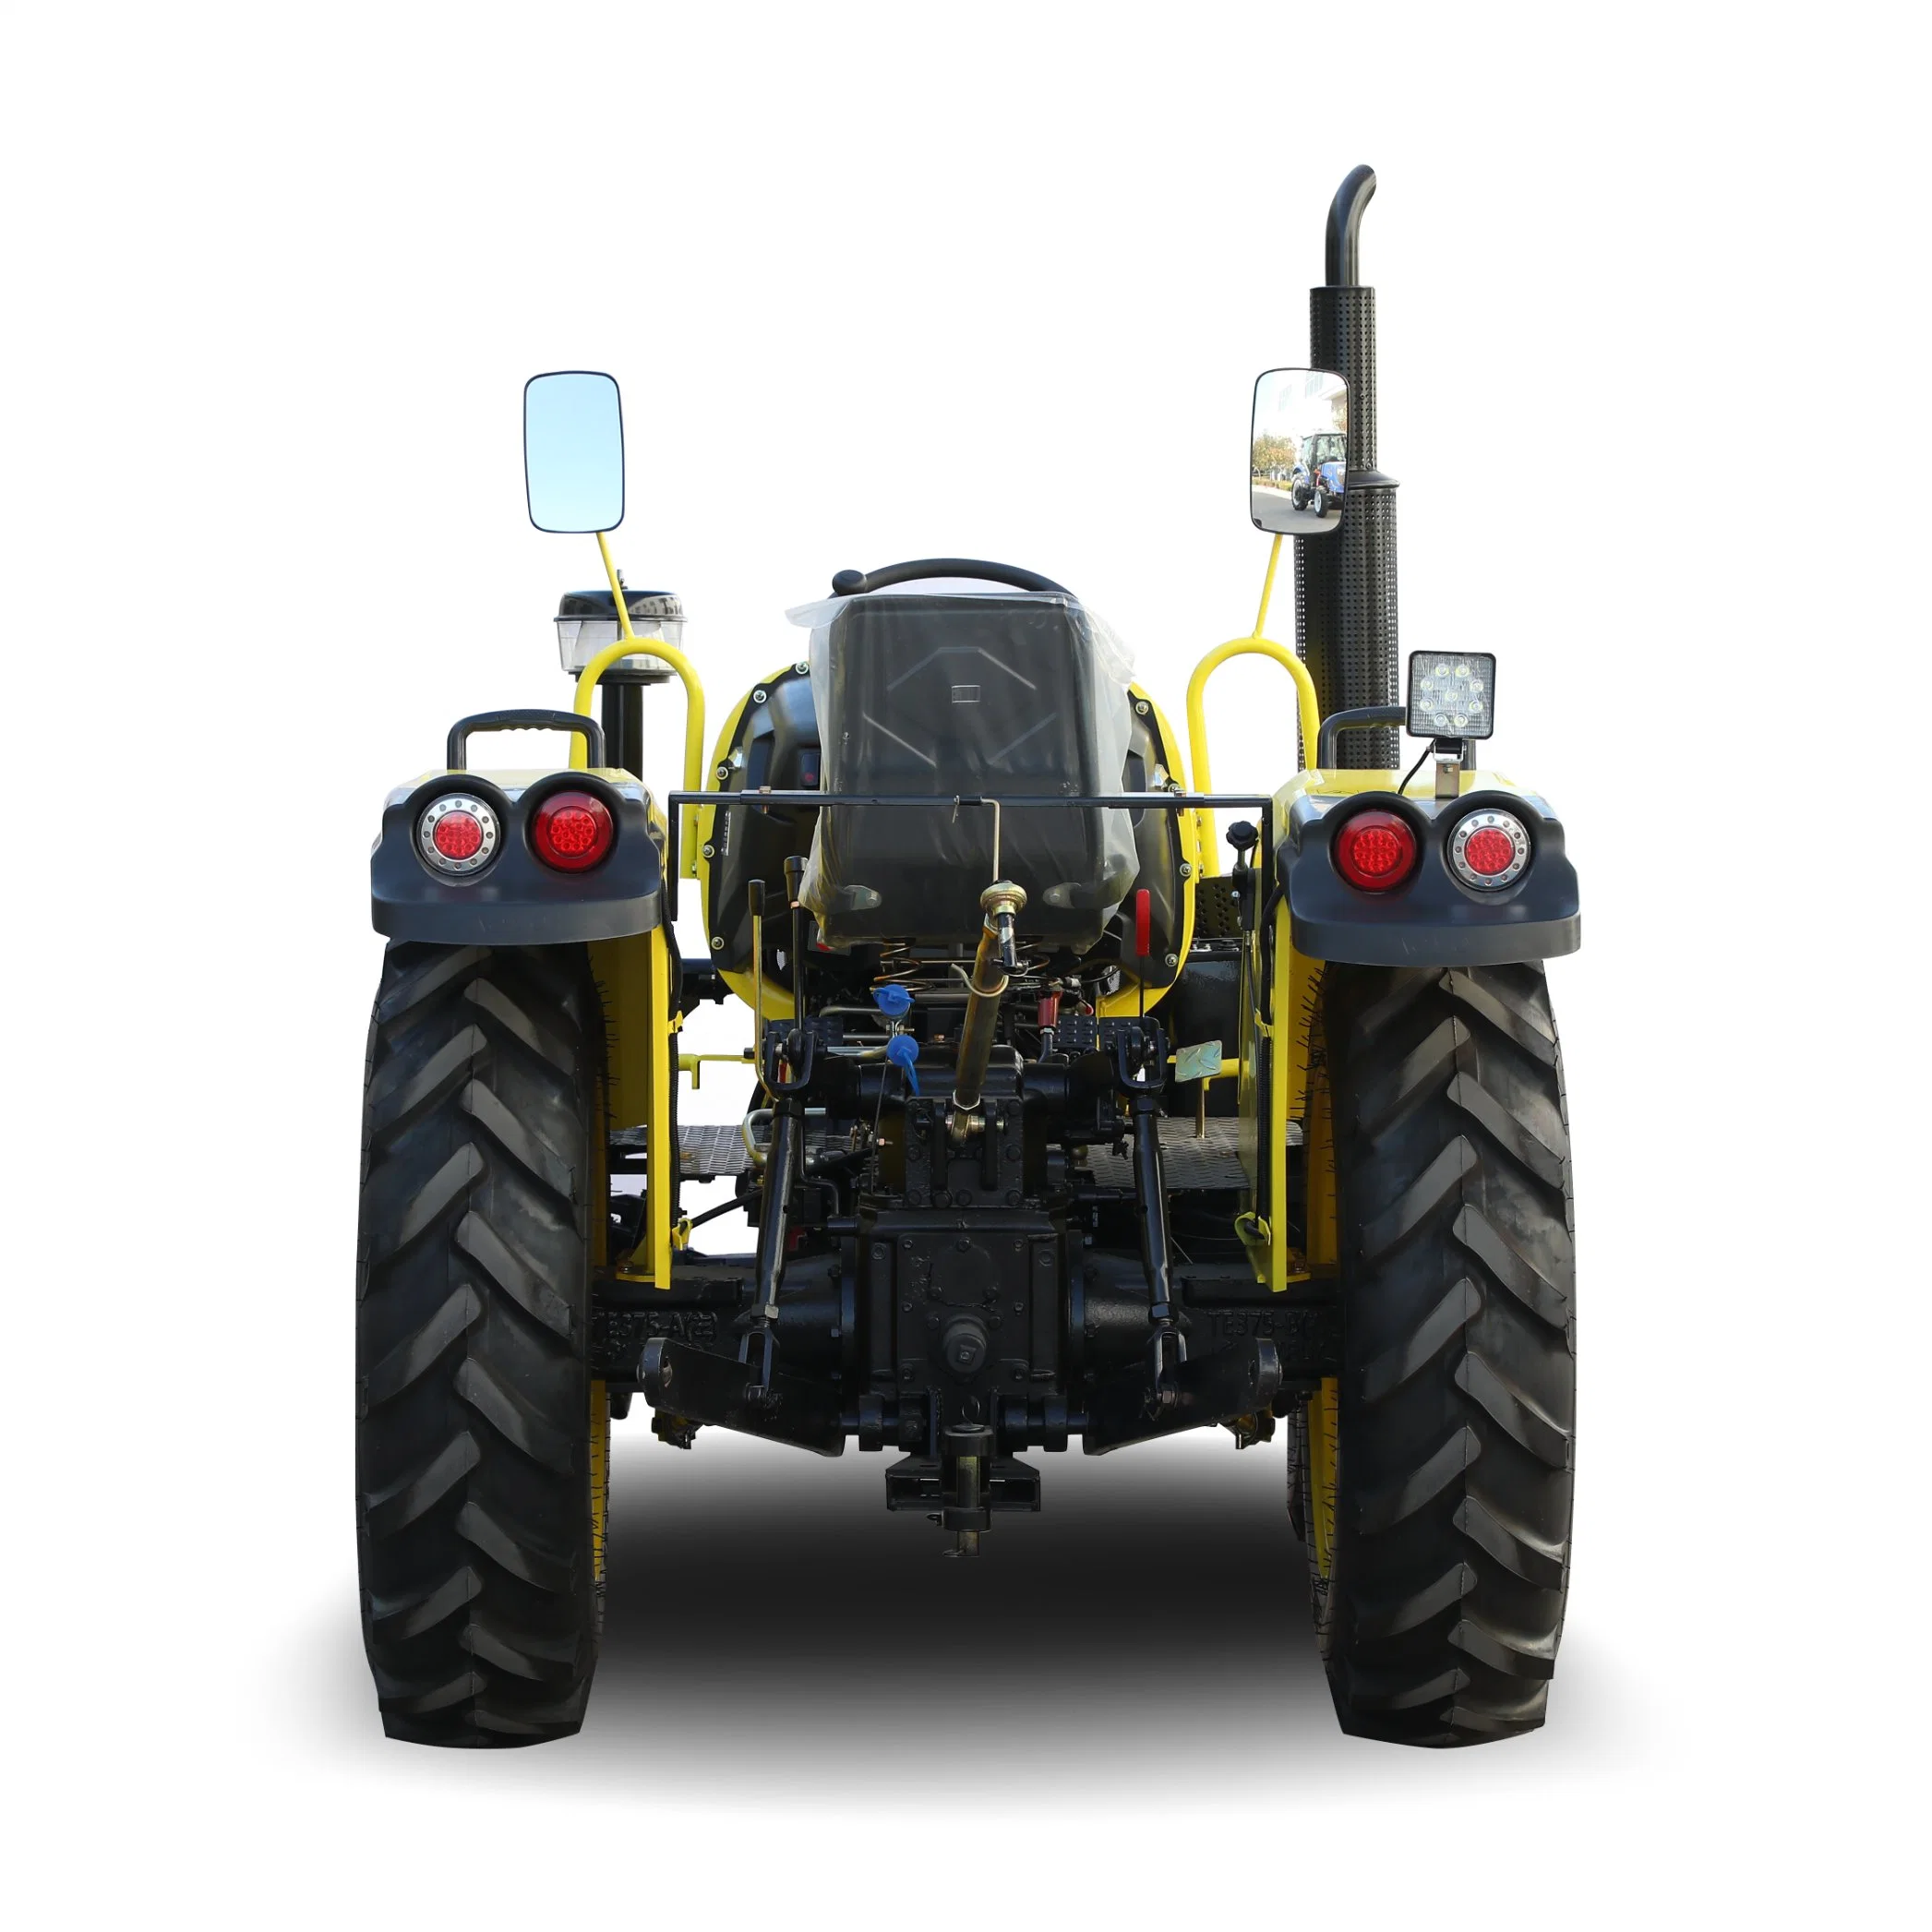 China Agriculture Farm Tractor 15HP 18HP 25HP 30HP 35HP 40HP 50HP 4 Wheeled Tractor Farm Mini Tractor for Agriculture Tractor Tool China Tractor